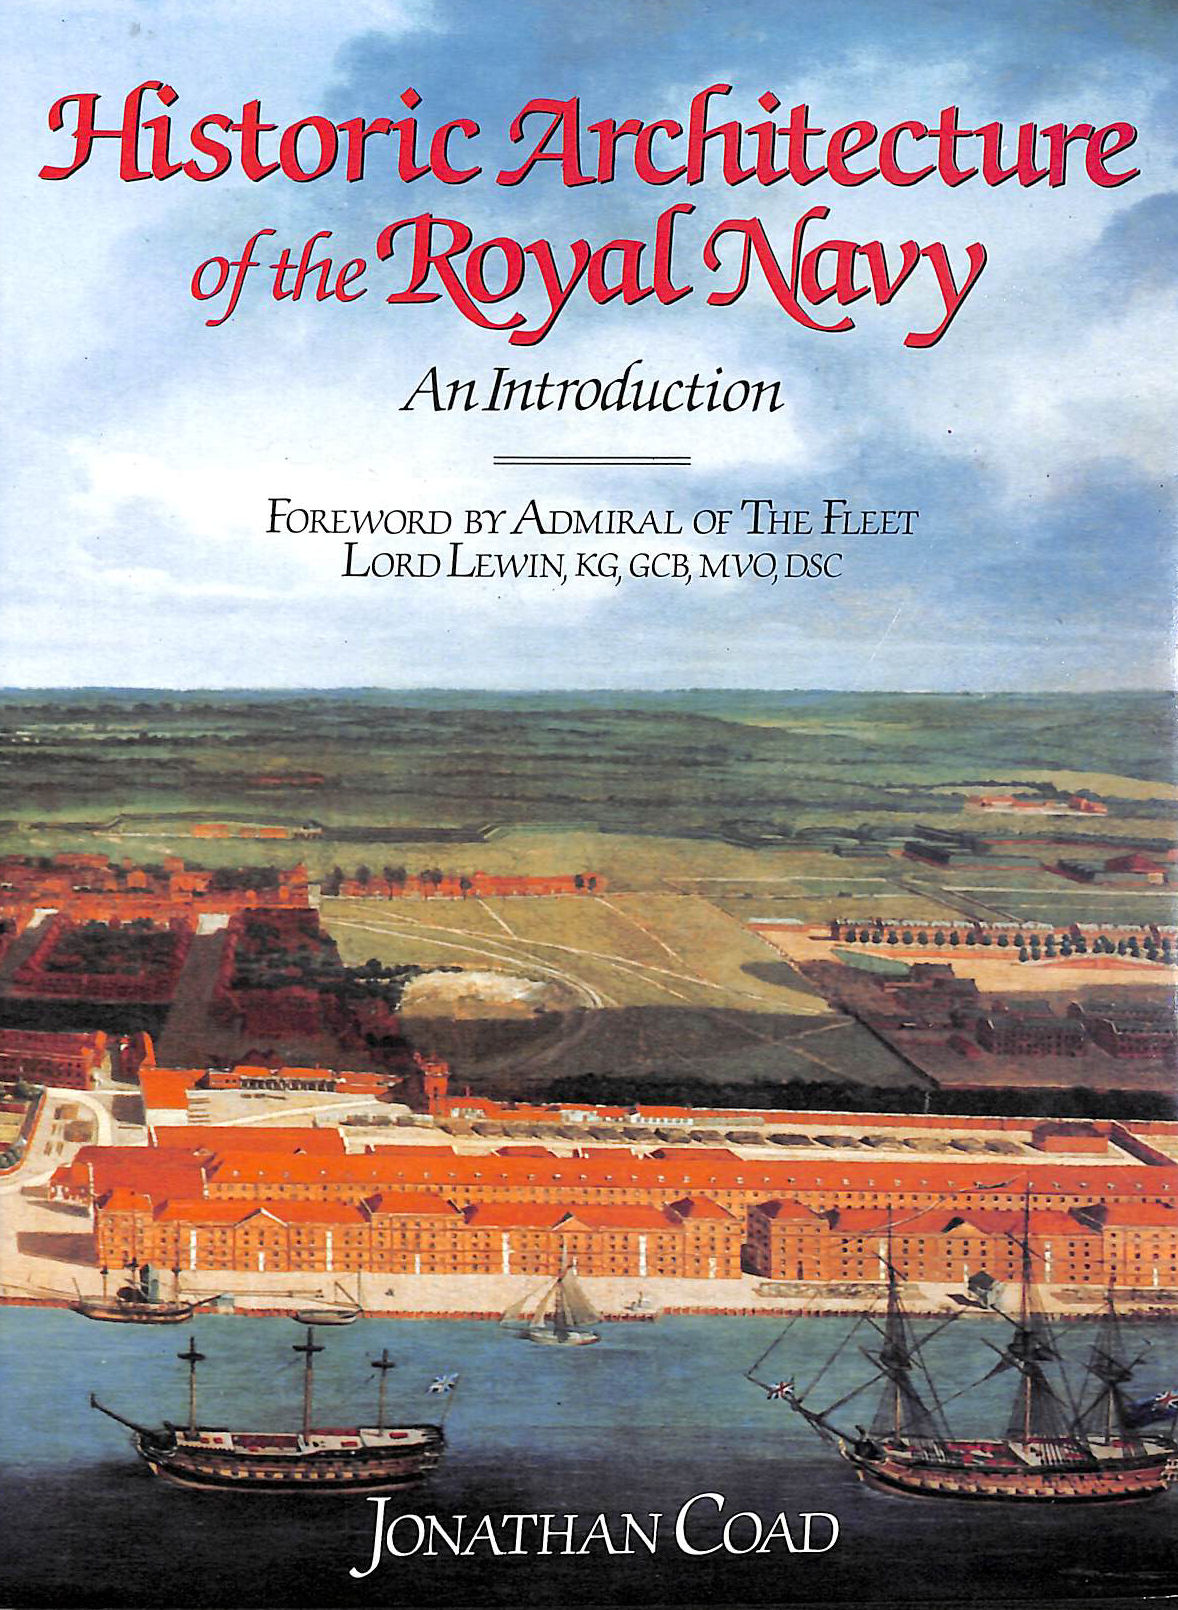 JONATHAN COAD; LORD LEWIN [FOREWORD] - Historic Architecture of the Royal Navy: An Introduction